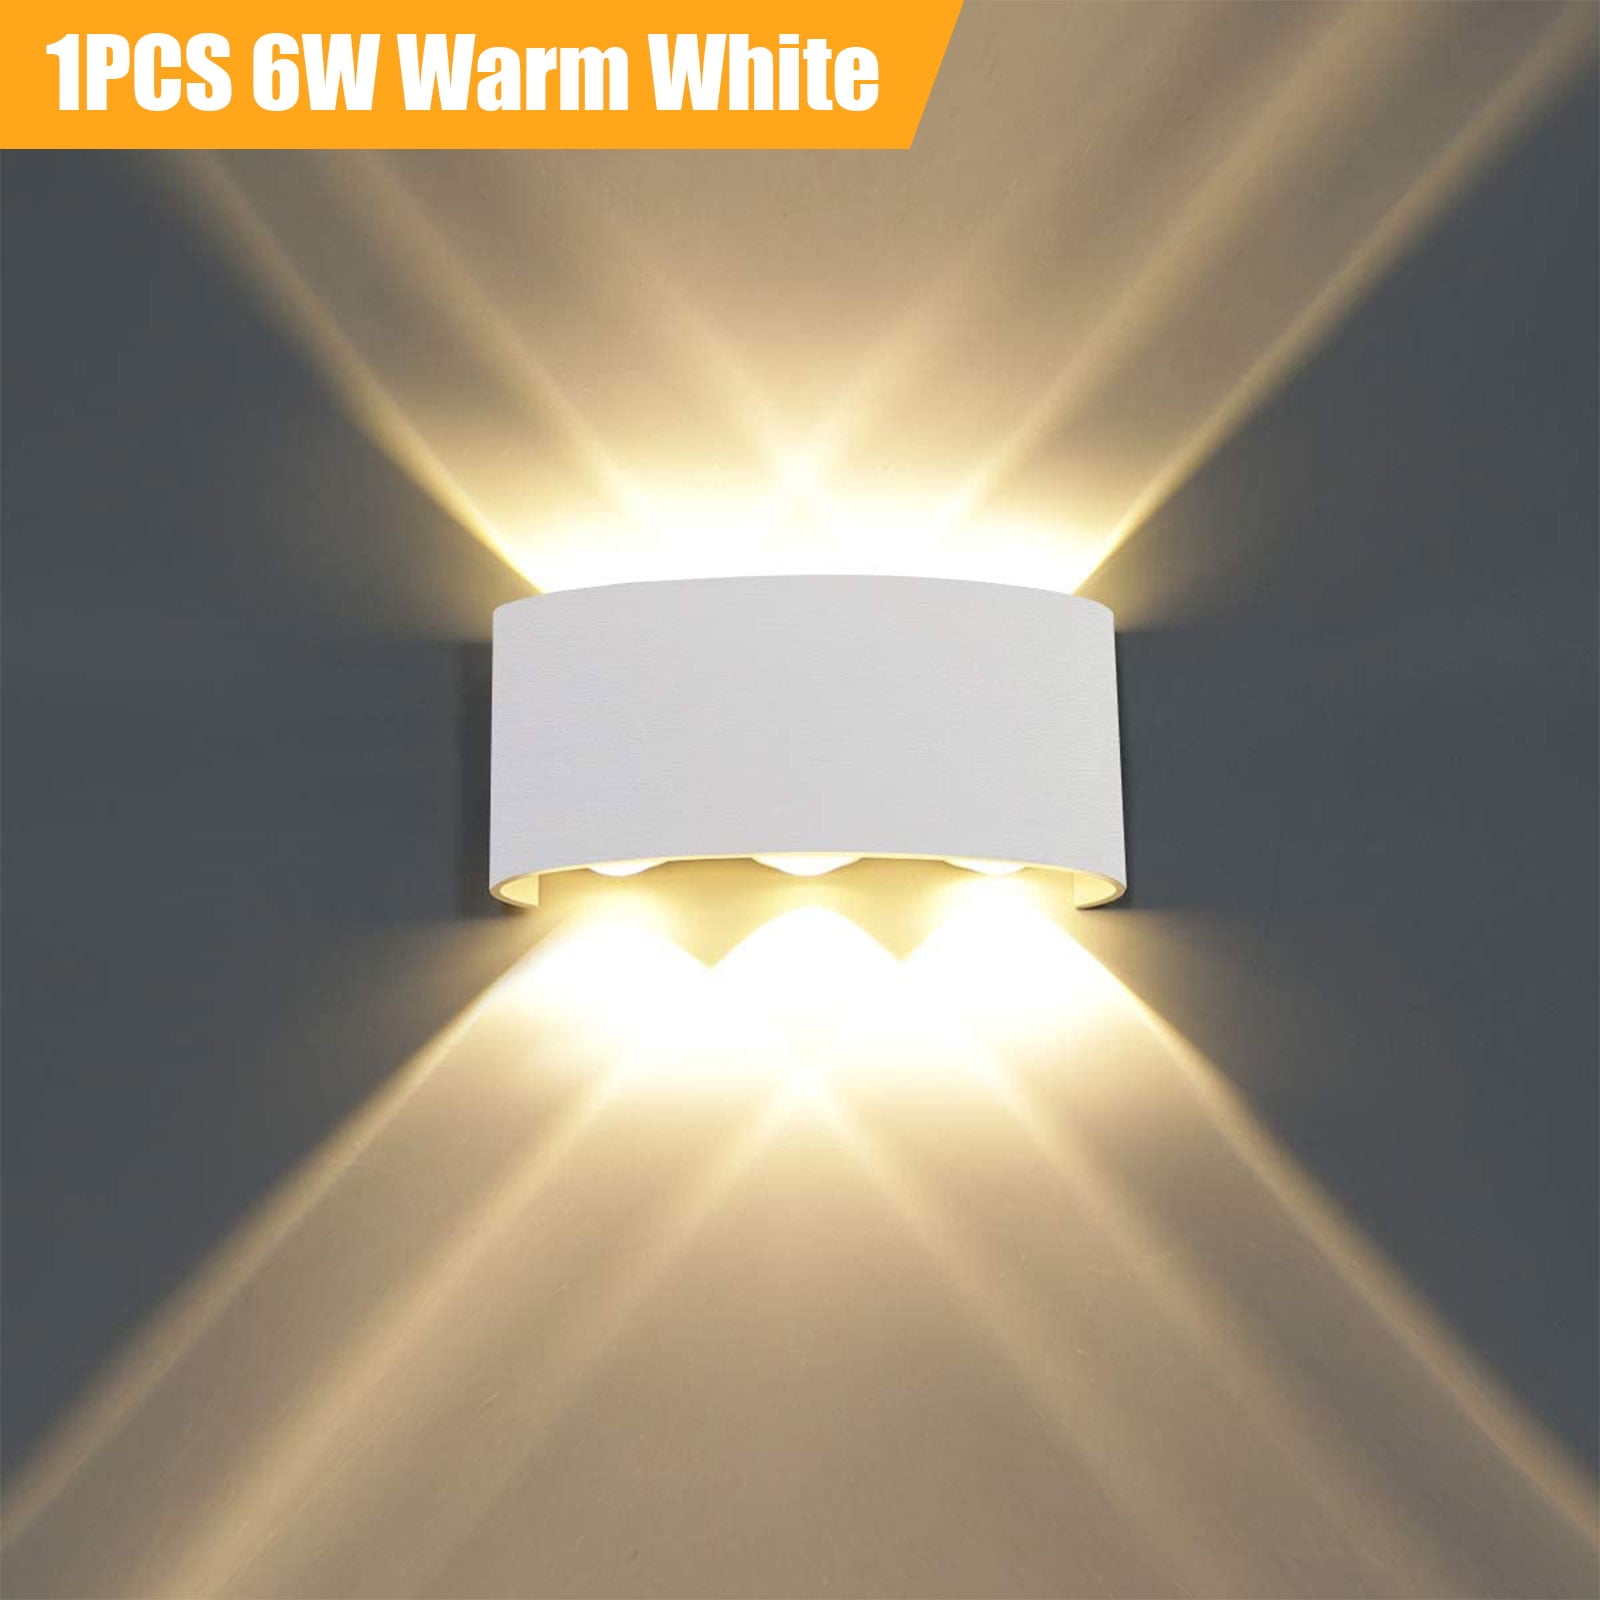 6/8W LED Wall Lights Modern Up Down Sconce Lighting Fixture Lamp Indoor Outdoor 